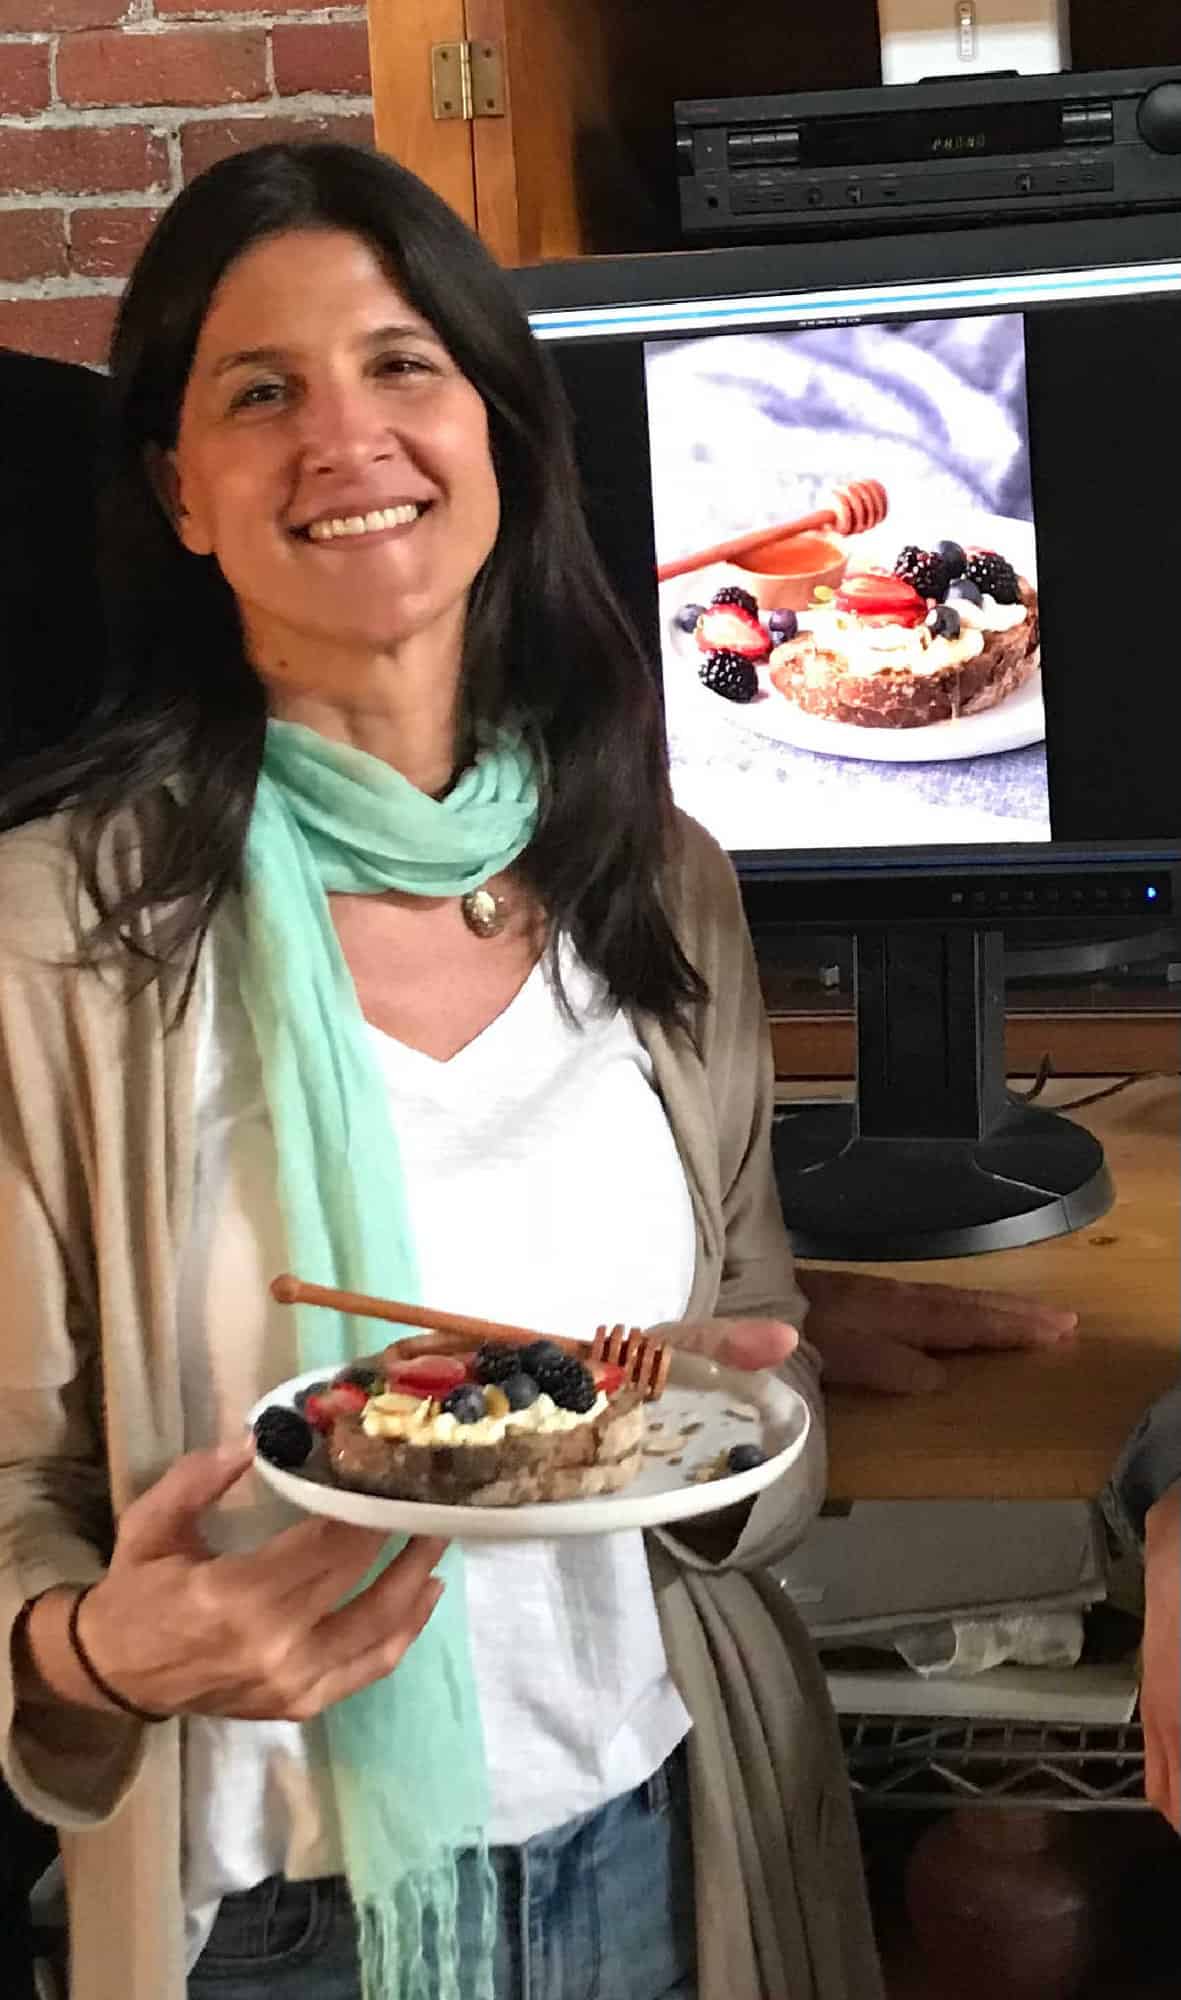 Dark haired person holding plate with food and image of said plate in background.